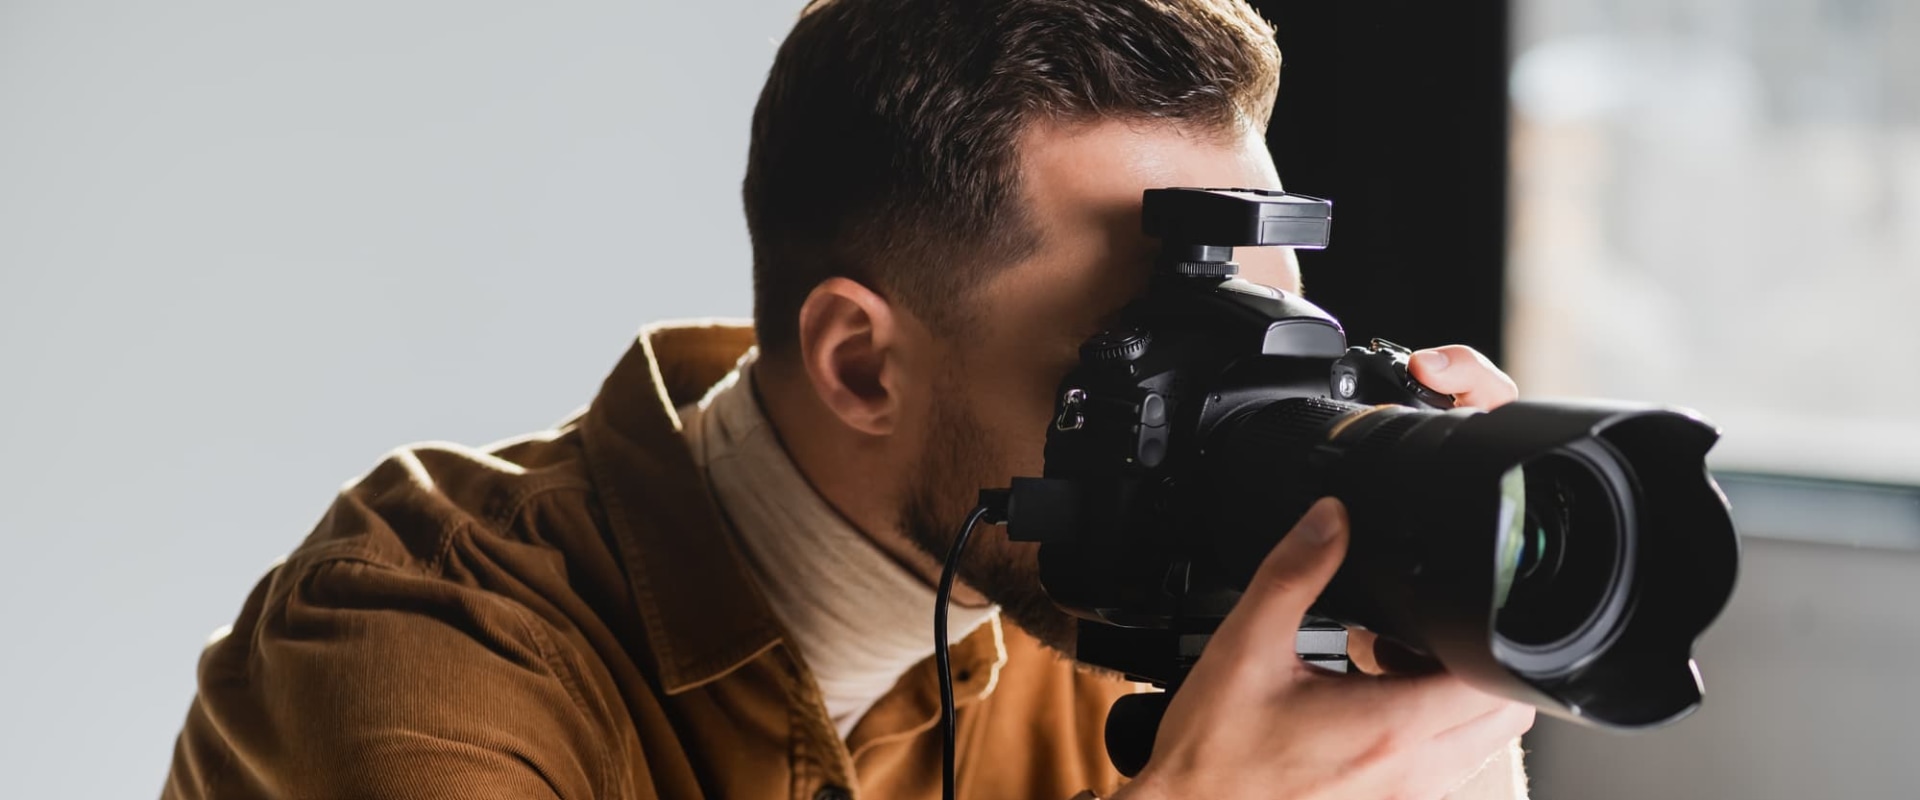 Understanding Deposits in Photography: What Photographers Need to Know